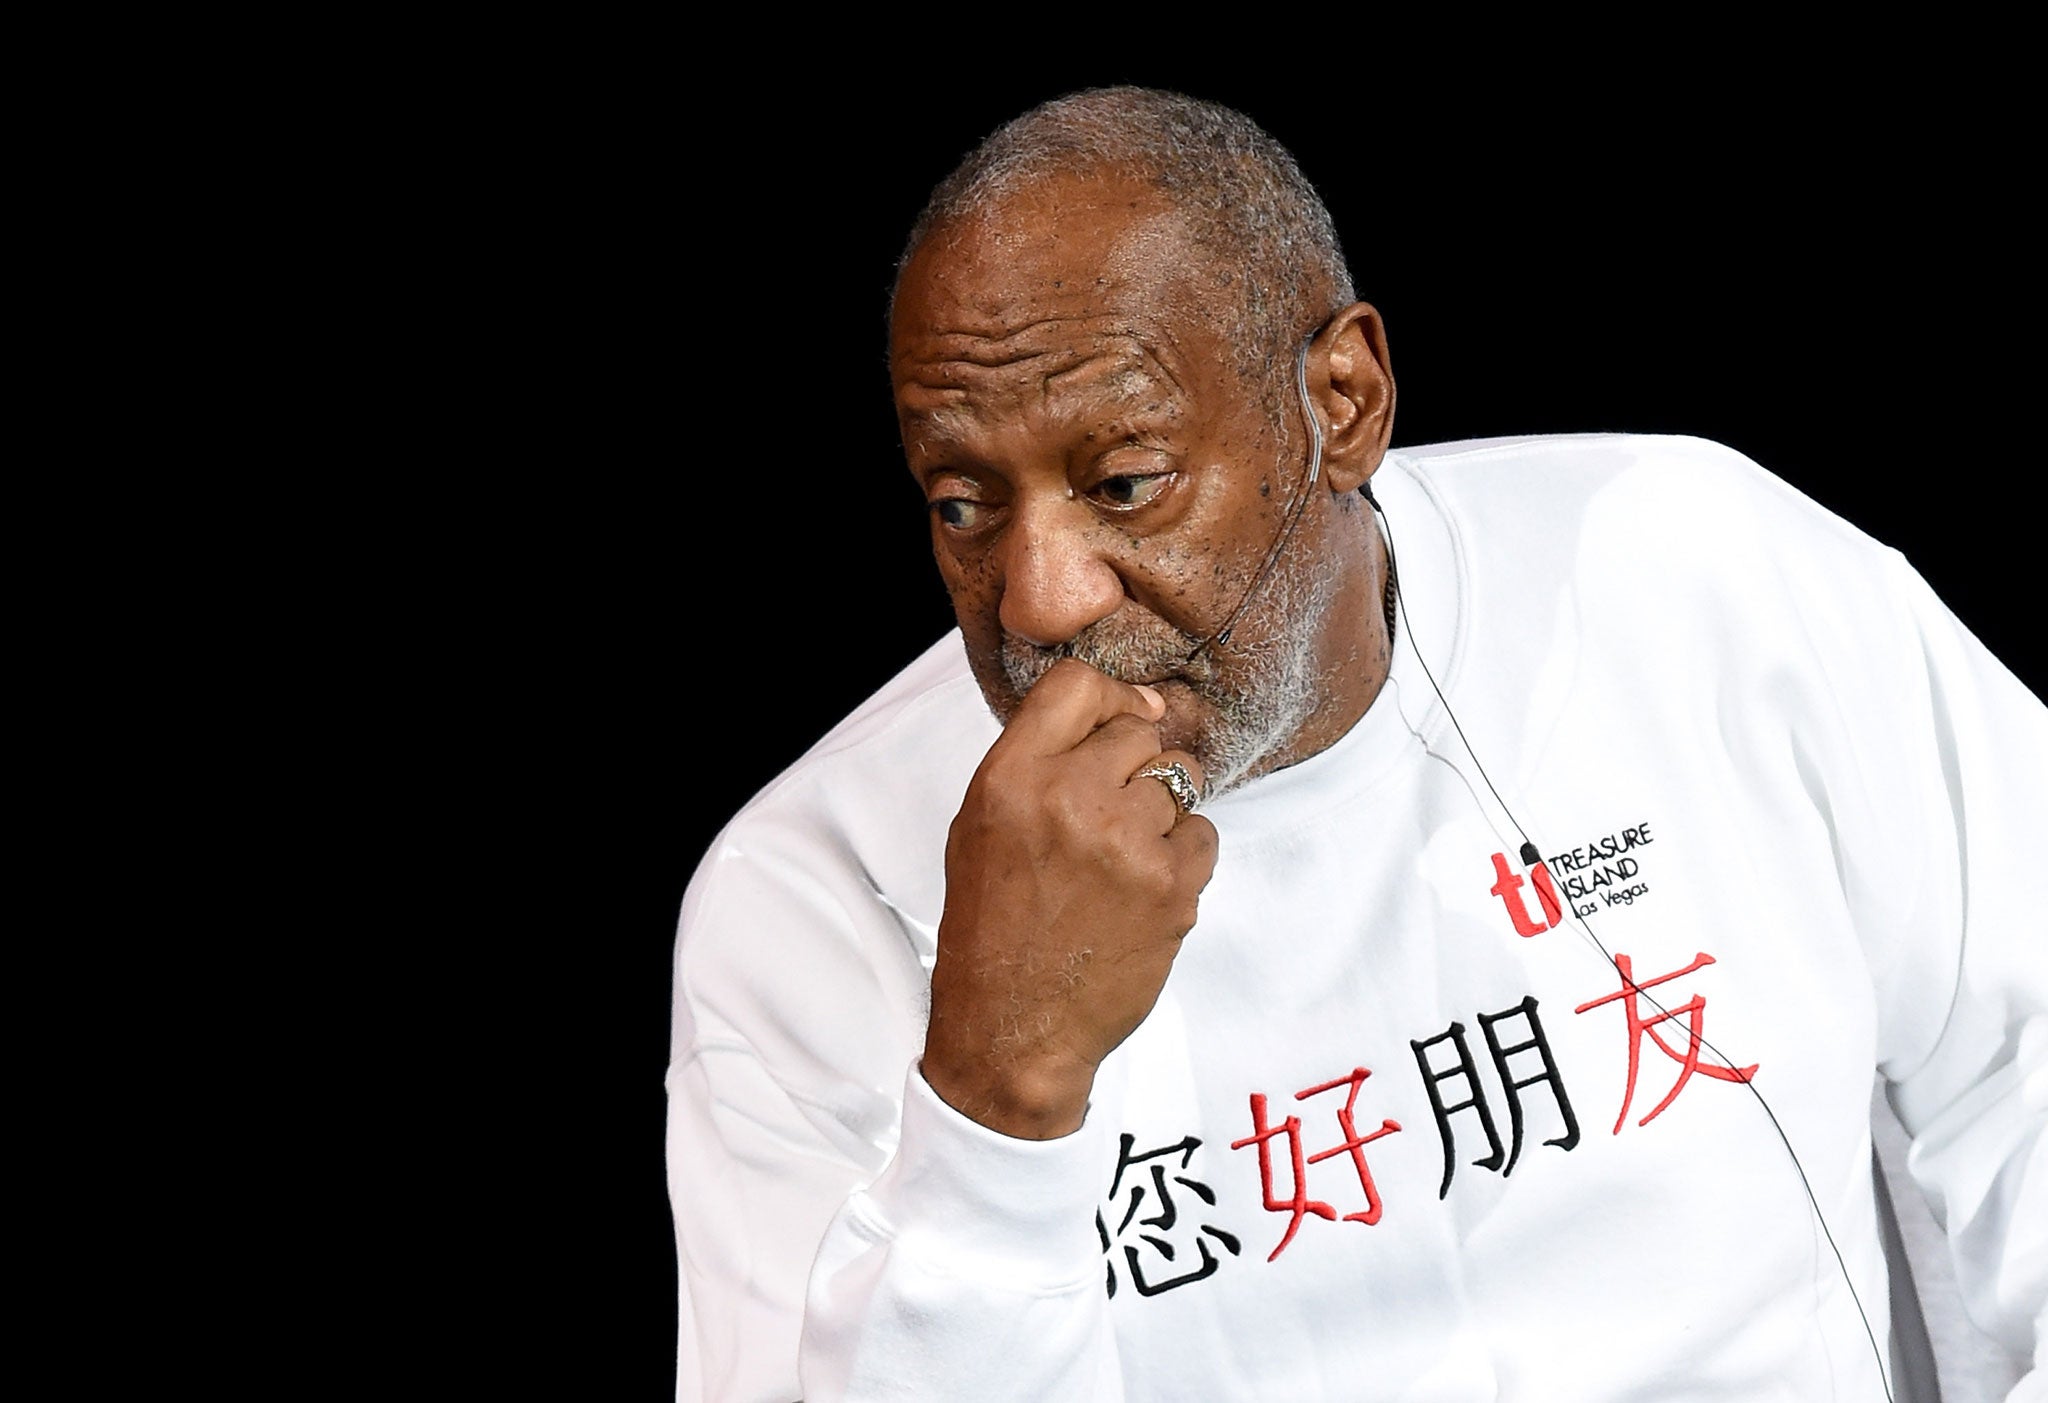 Bill Cosby refused to speak about the sex abuse allegations in a radio interview this weekend